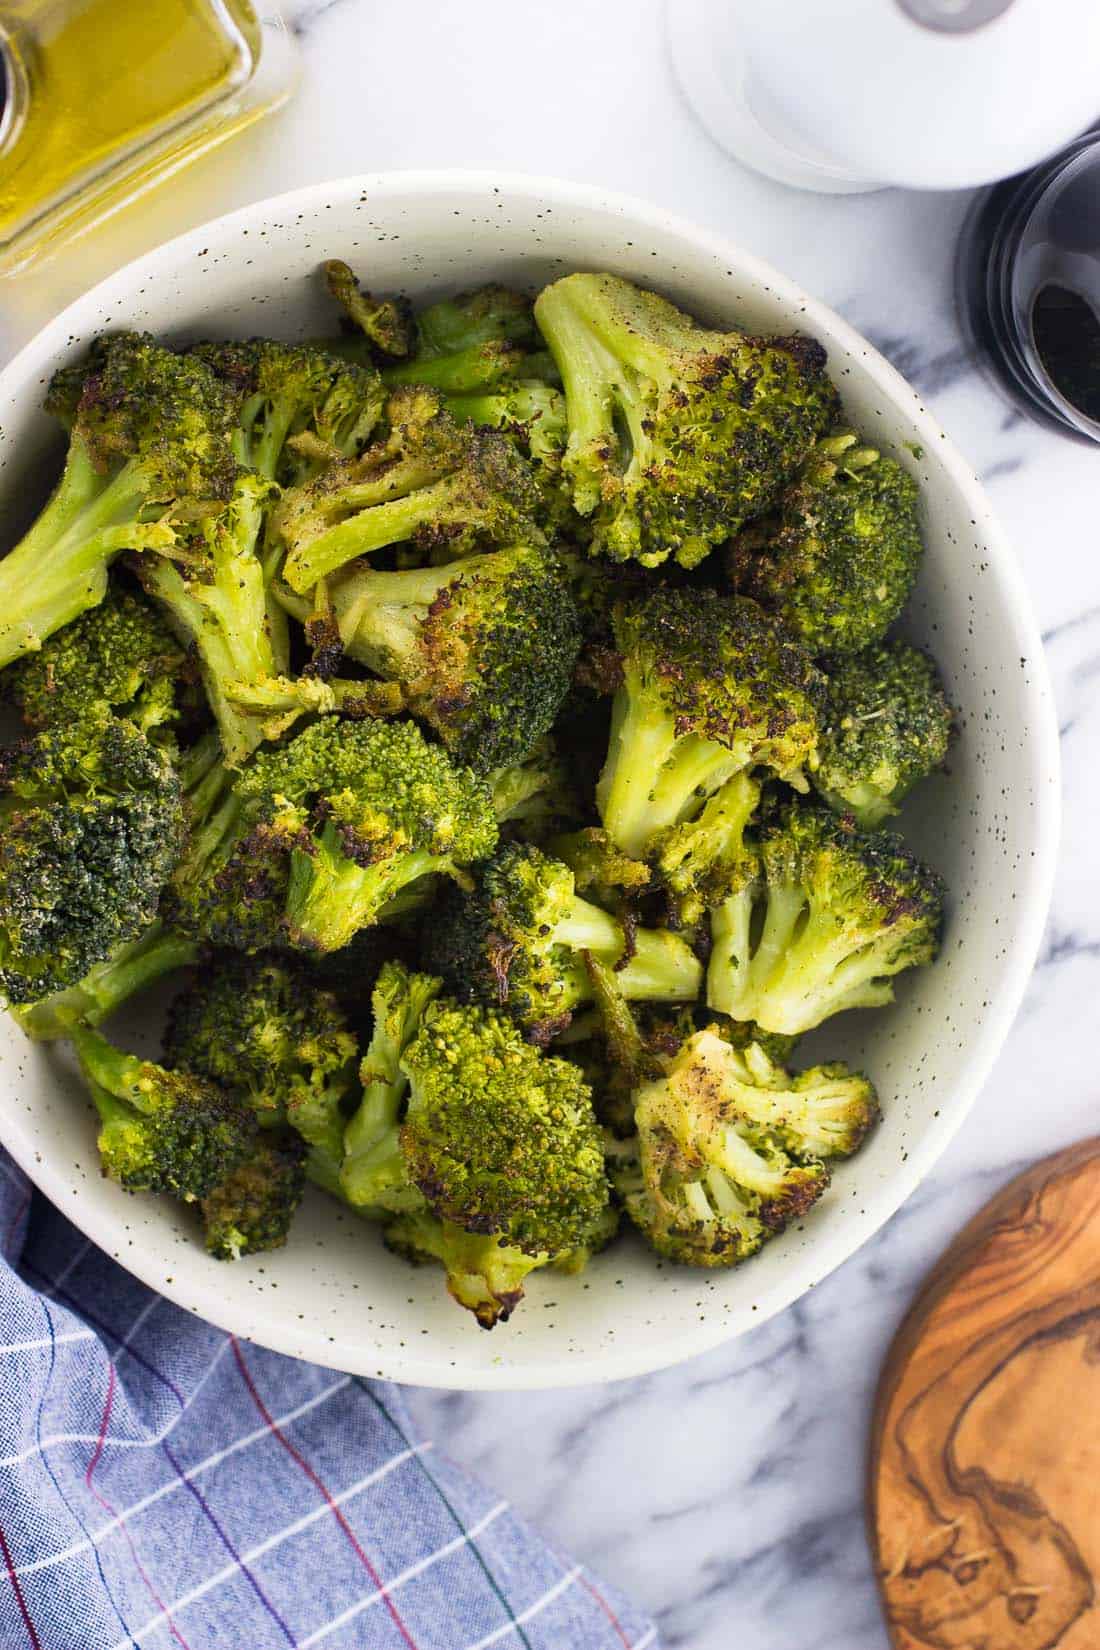 A bowl of roasted broccoli ready for serving.